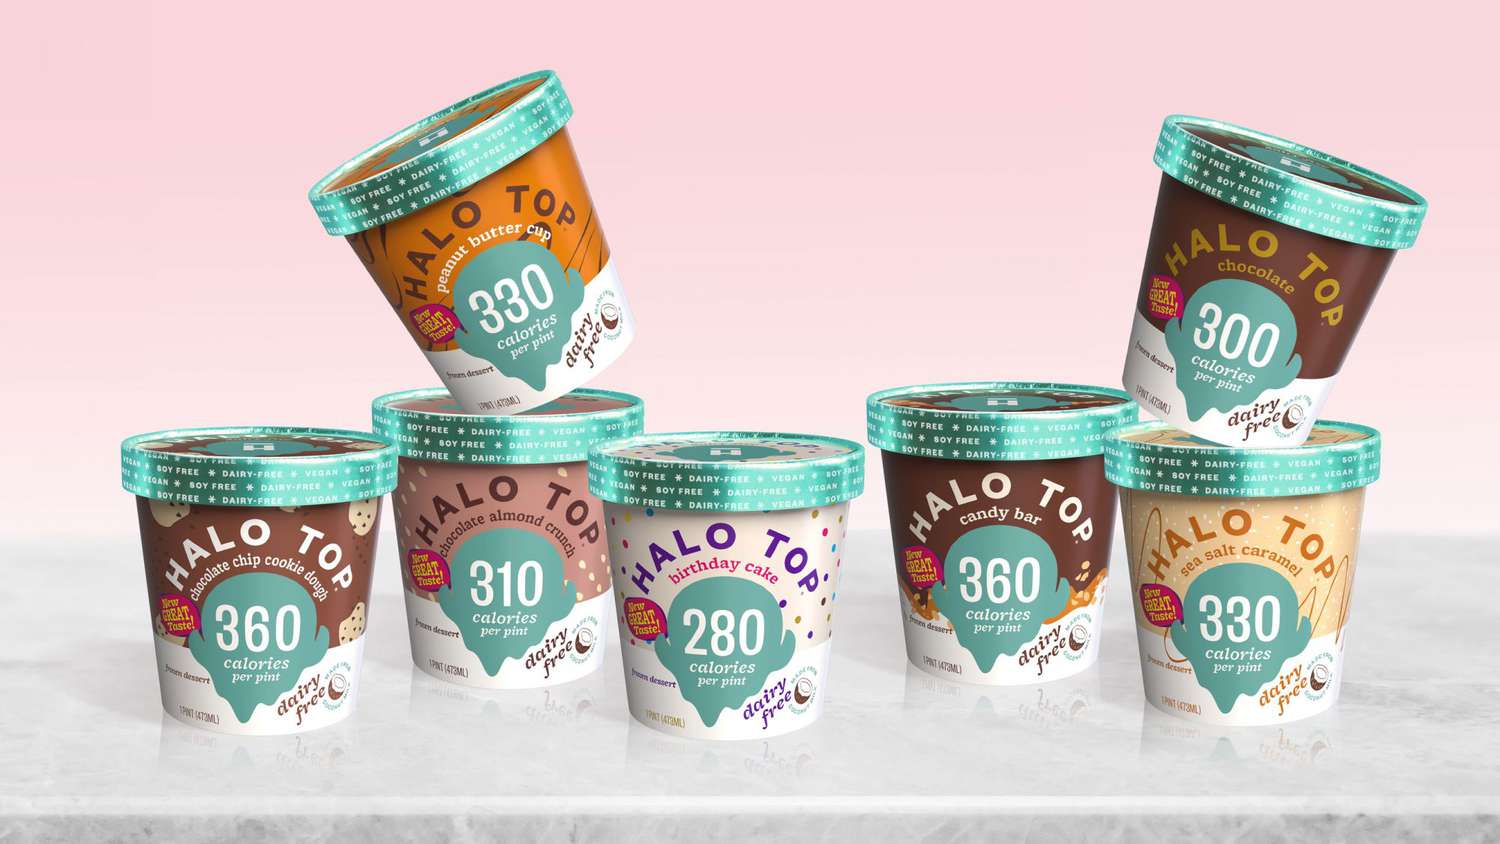 Halo Top Is Relaunching Their Dairy-Free Ice Cream |